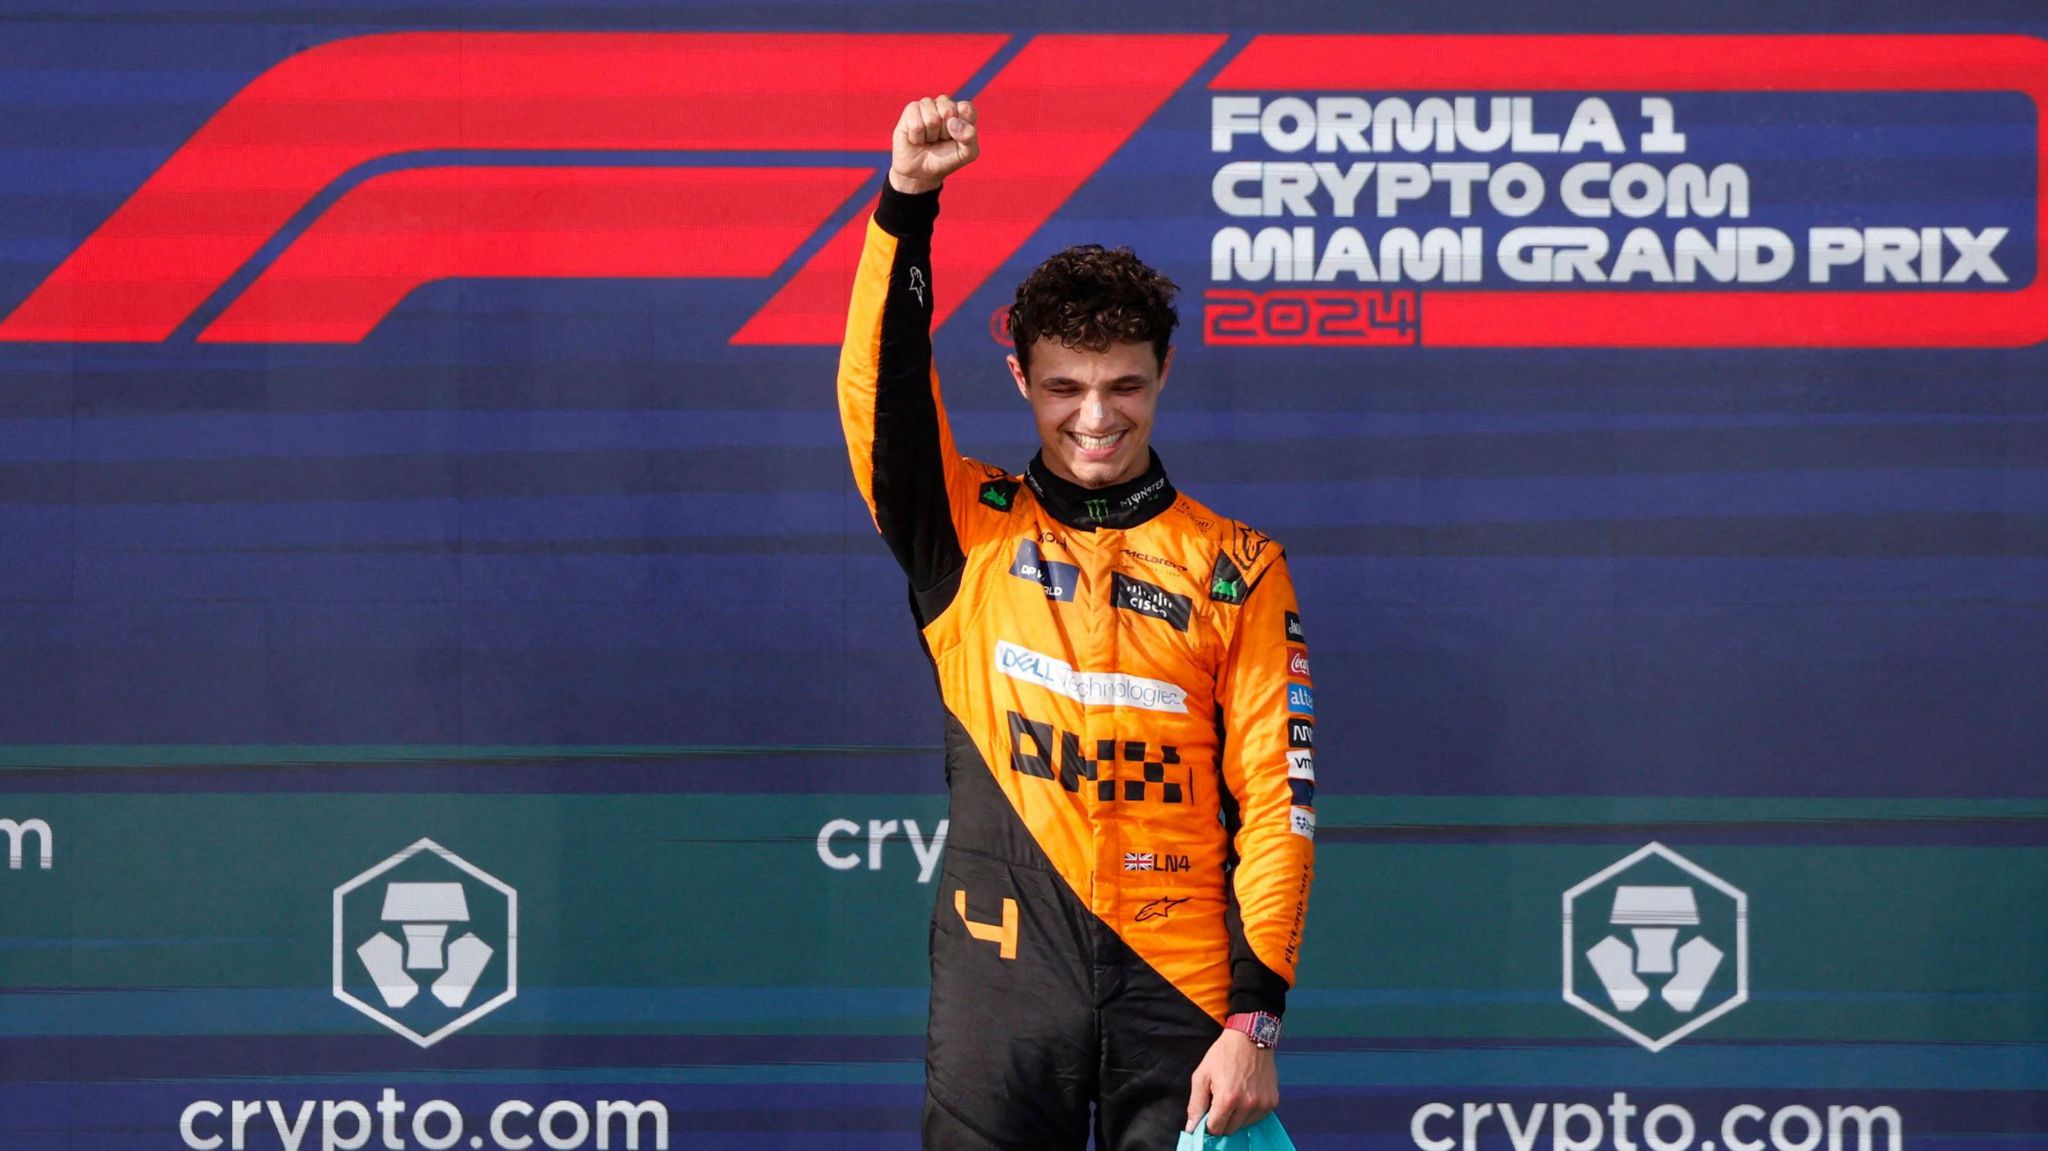 Image of Lando Norris after the Miami Grand Prix. He is wearing an orange and black racing suit, with his fist in the air. His eyes are closed and he is smiling. 